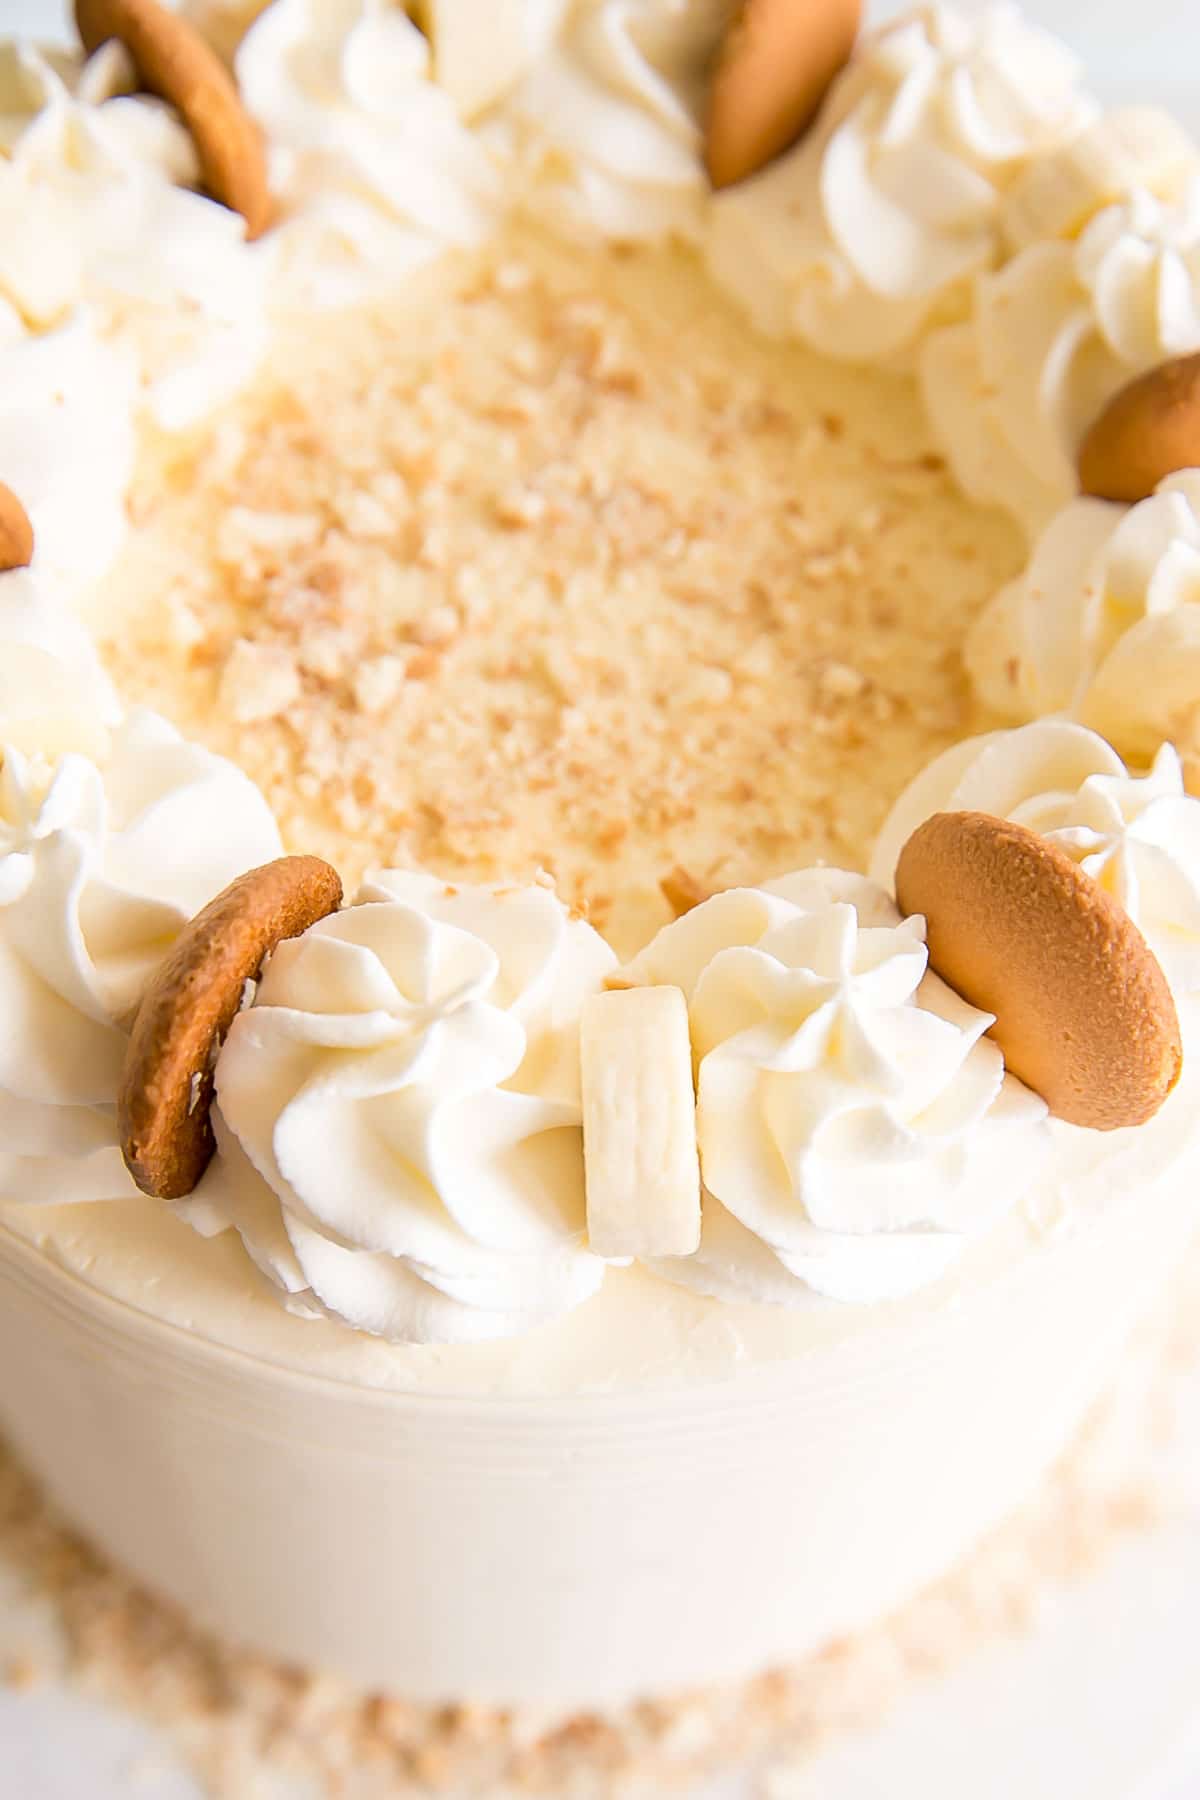 Close up of the top of the cake showing whipped cream rosettes, banana slices, and Nilla wafers.